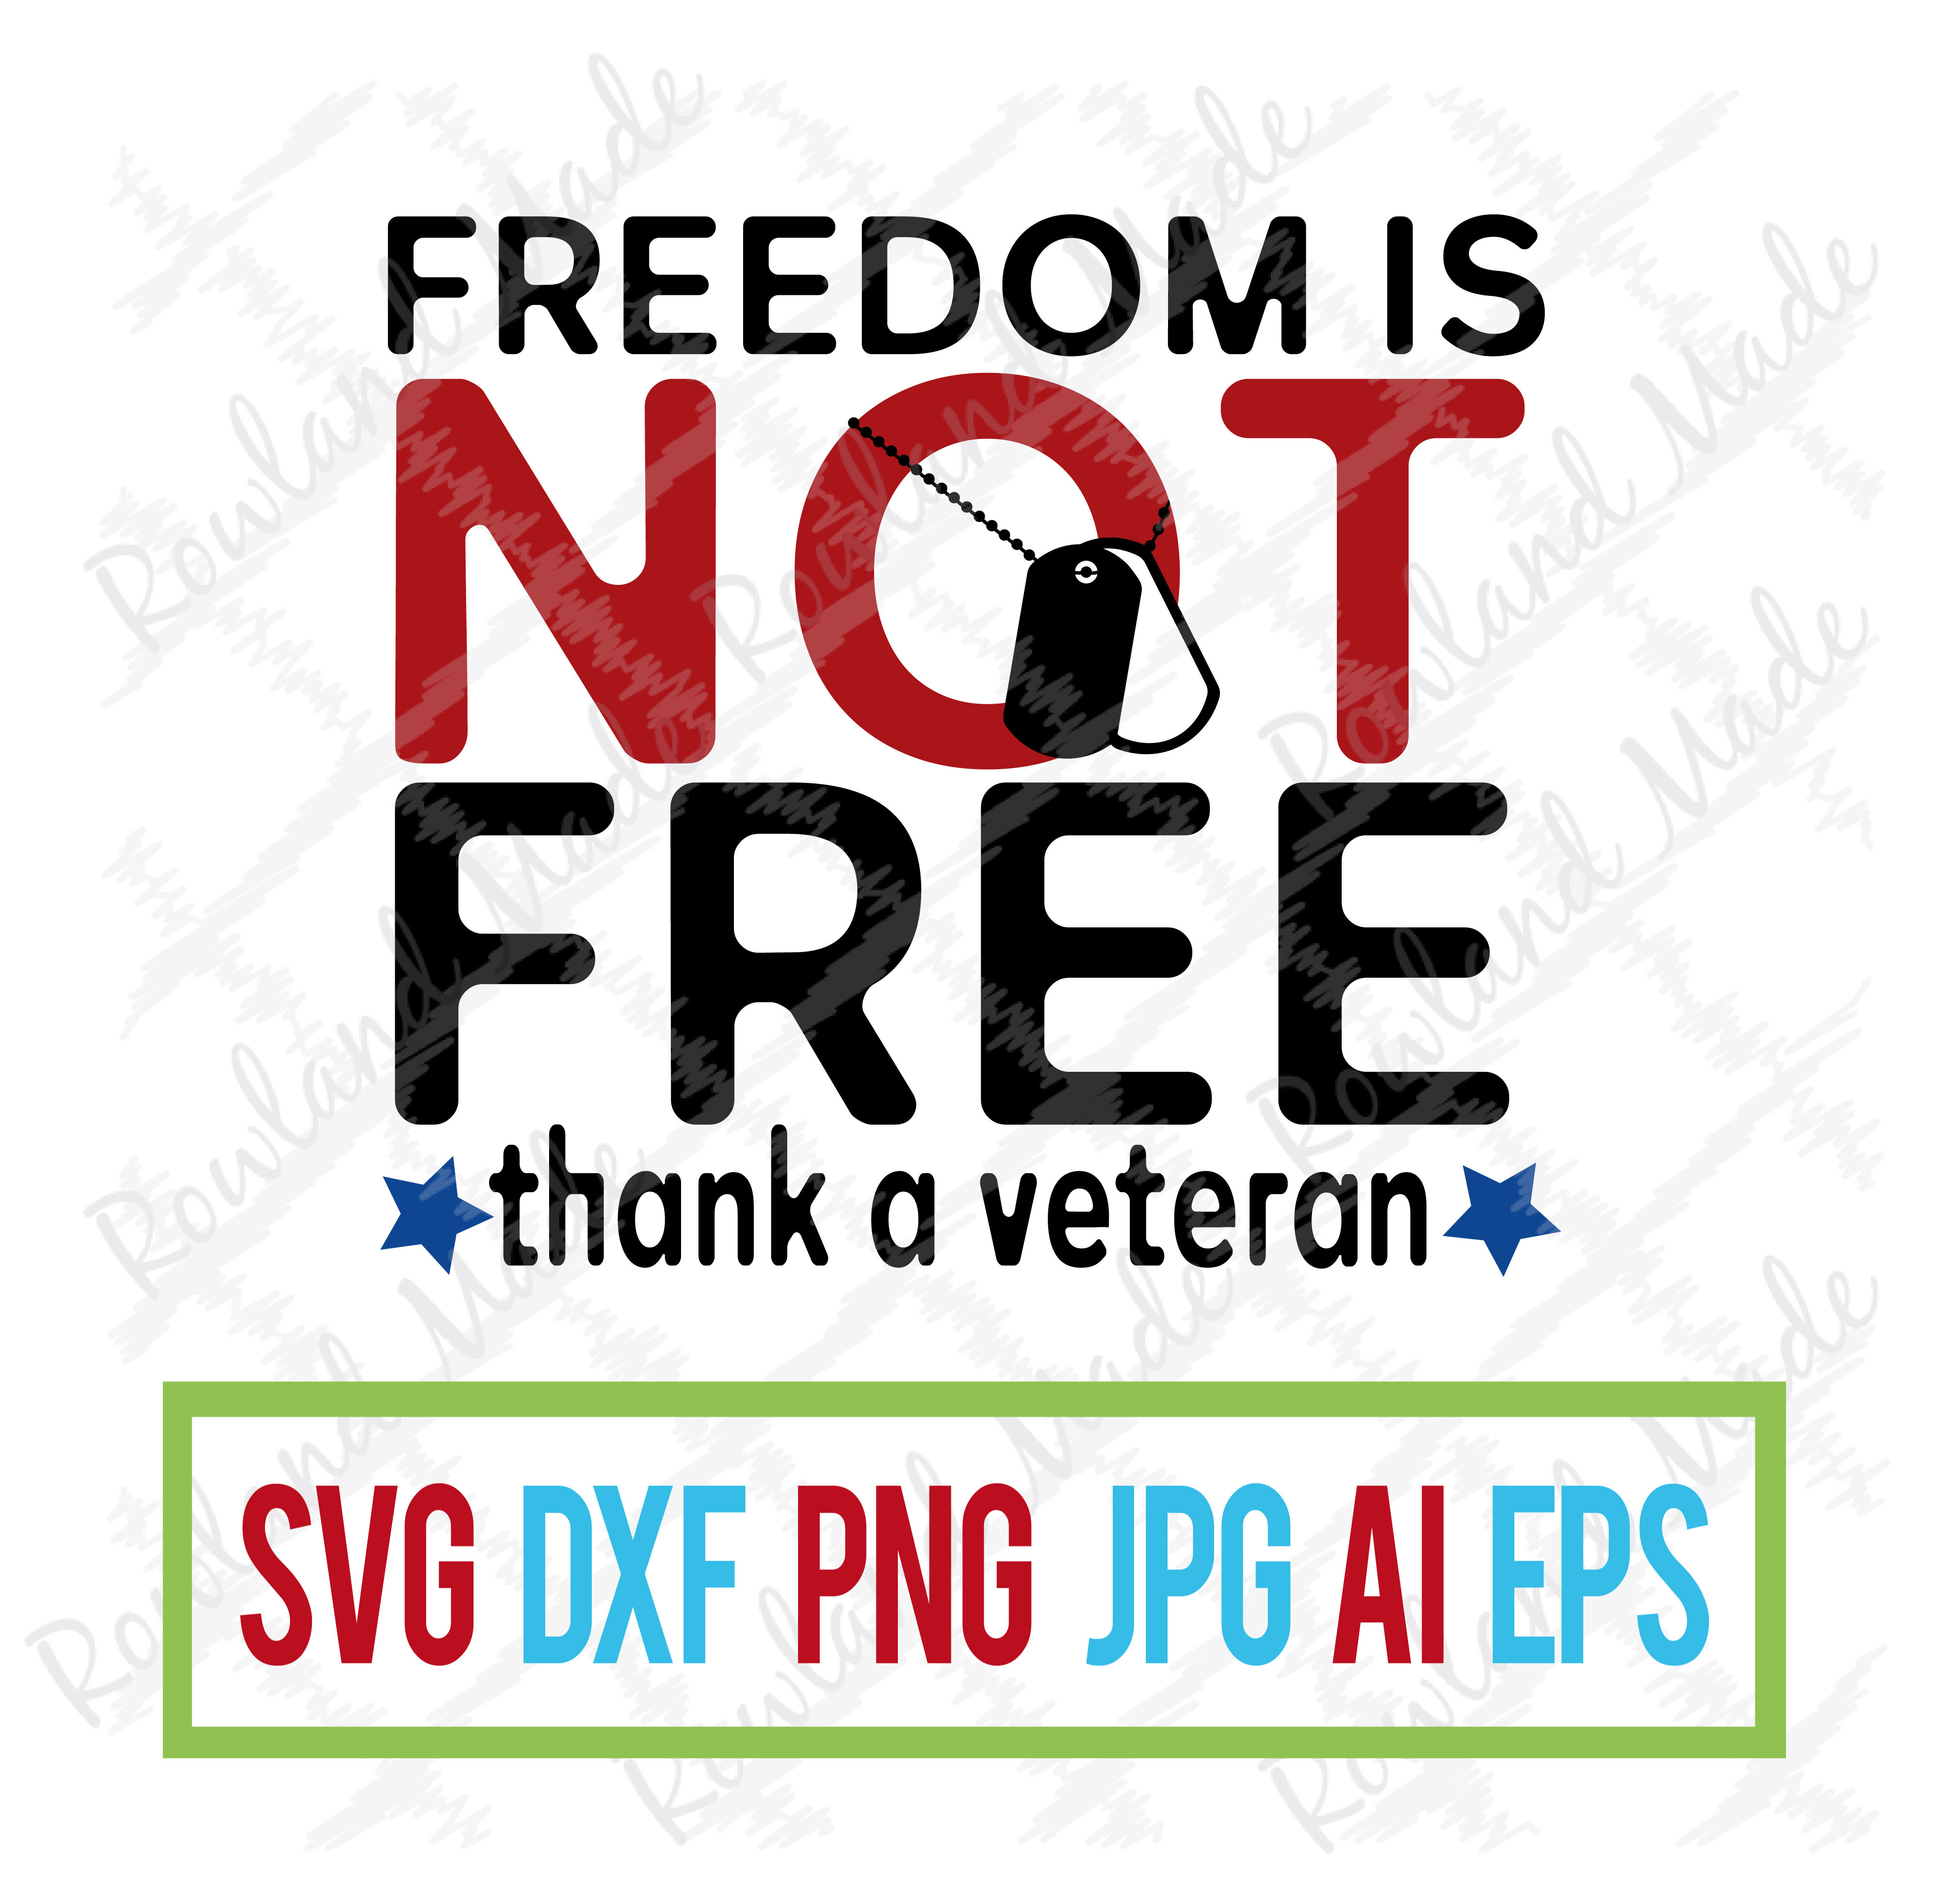 ori 3581296 qh04m0zsinoy9lamjnphissvdjux843eioon5050 freedom is not free svg 4th of july independence day usa